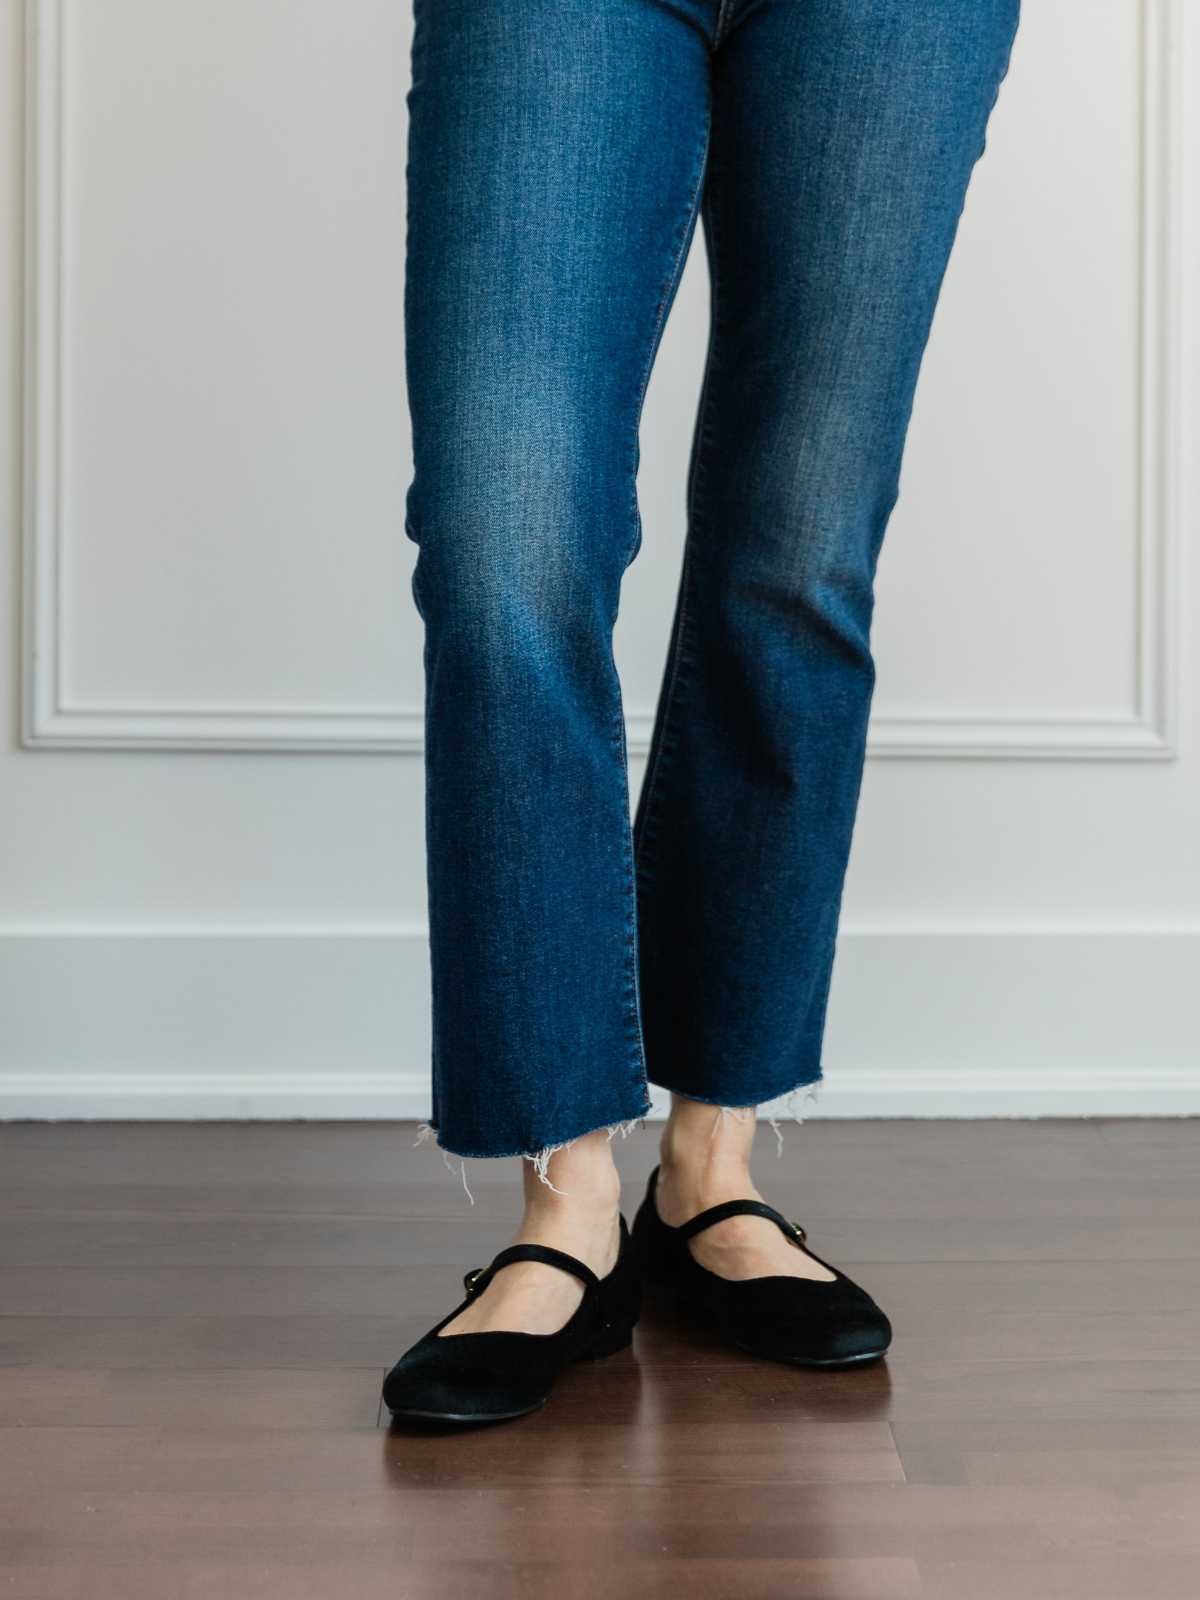 Cropped view of woman's legs wearing  ballerina flats with kick flares